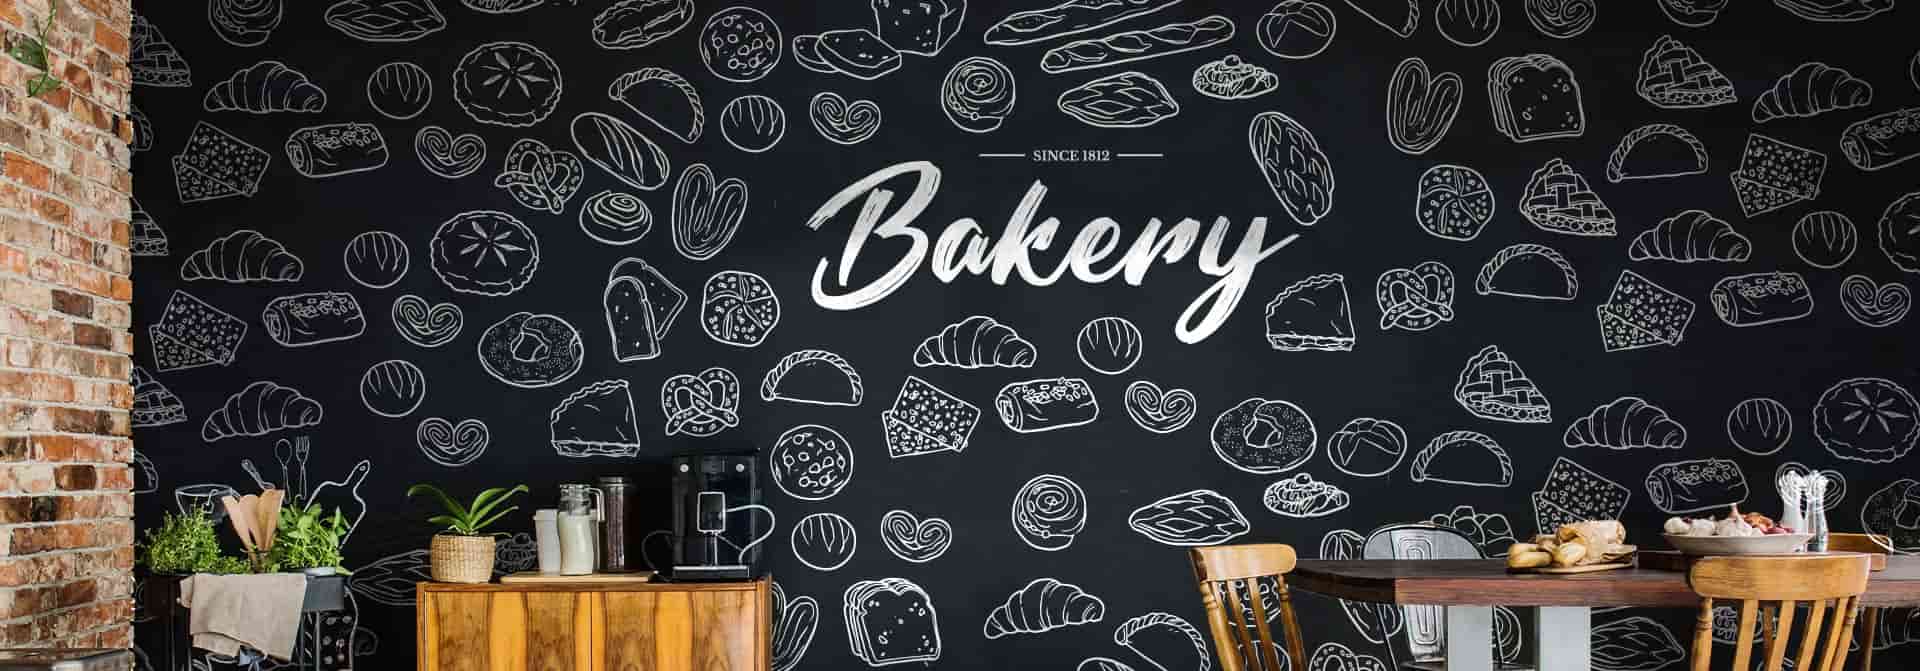 Modern bakery wall art adorned with a pastry motif and the word bakery.